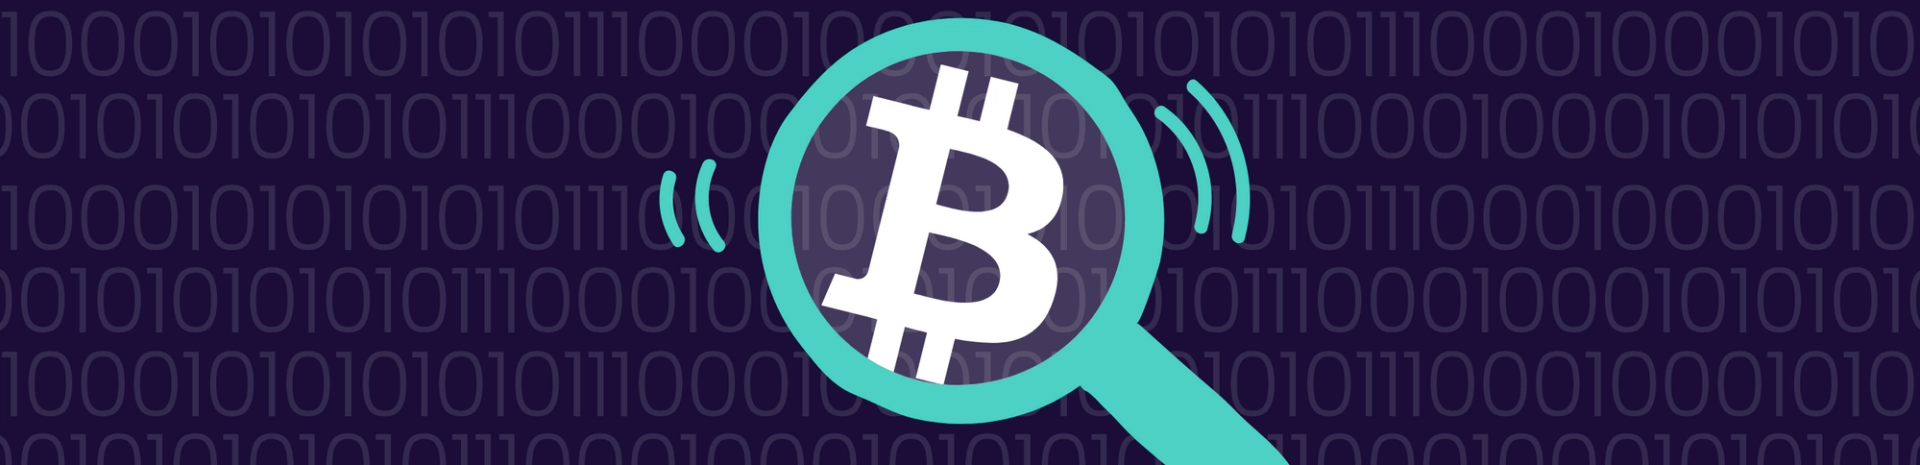 Illustration of a magnifying glass with the Bitcoin logo in focus on a background of encrypted data.